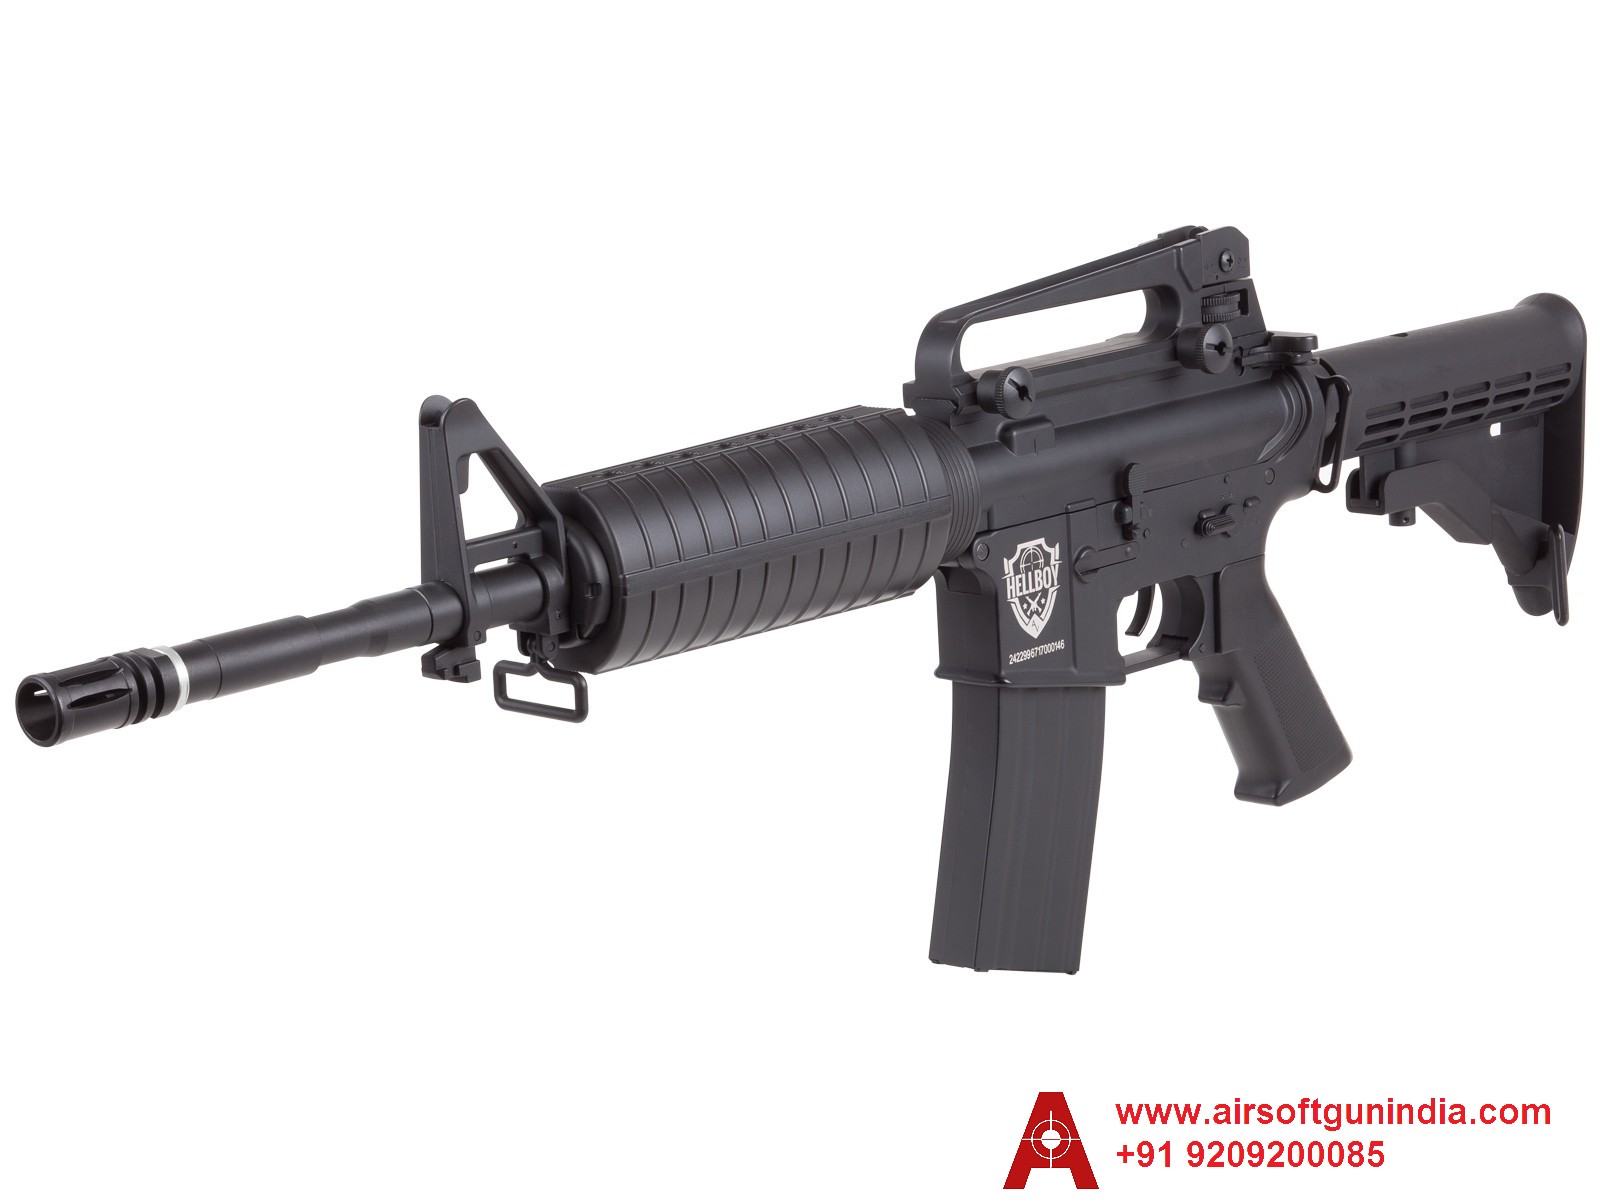 HellBoy M4  .177 CO2 BB Tactical Air Rifle, Black In India By Airsoft Gun India